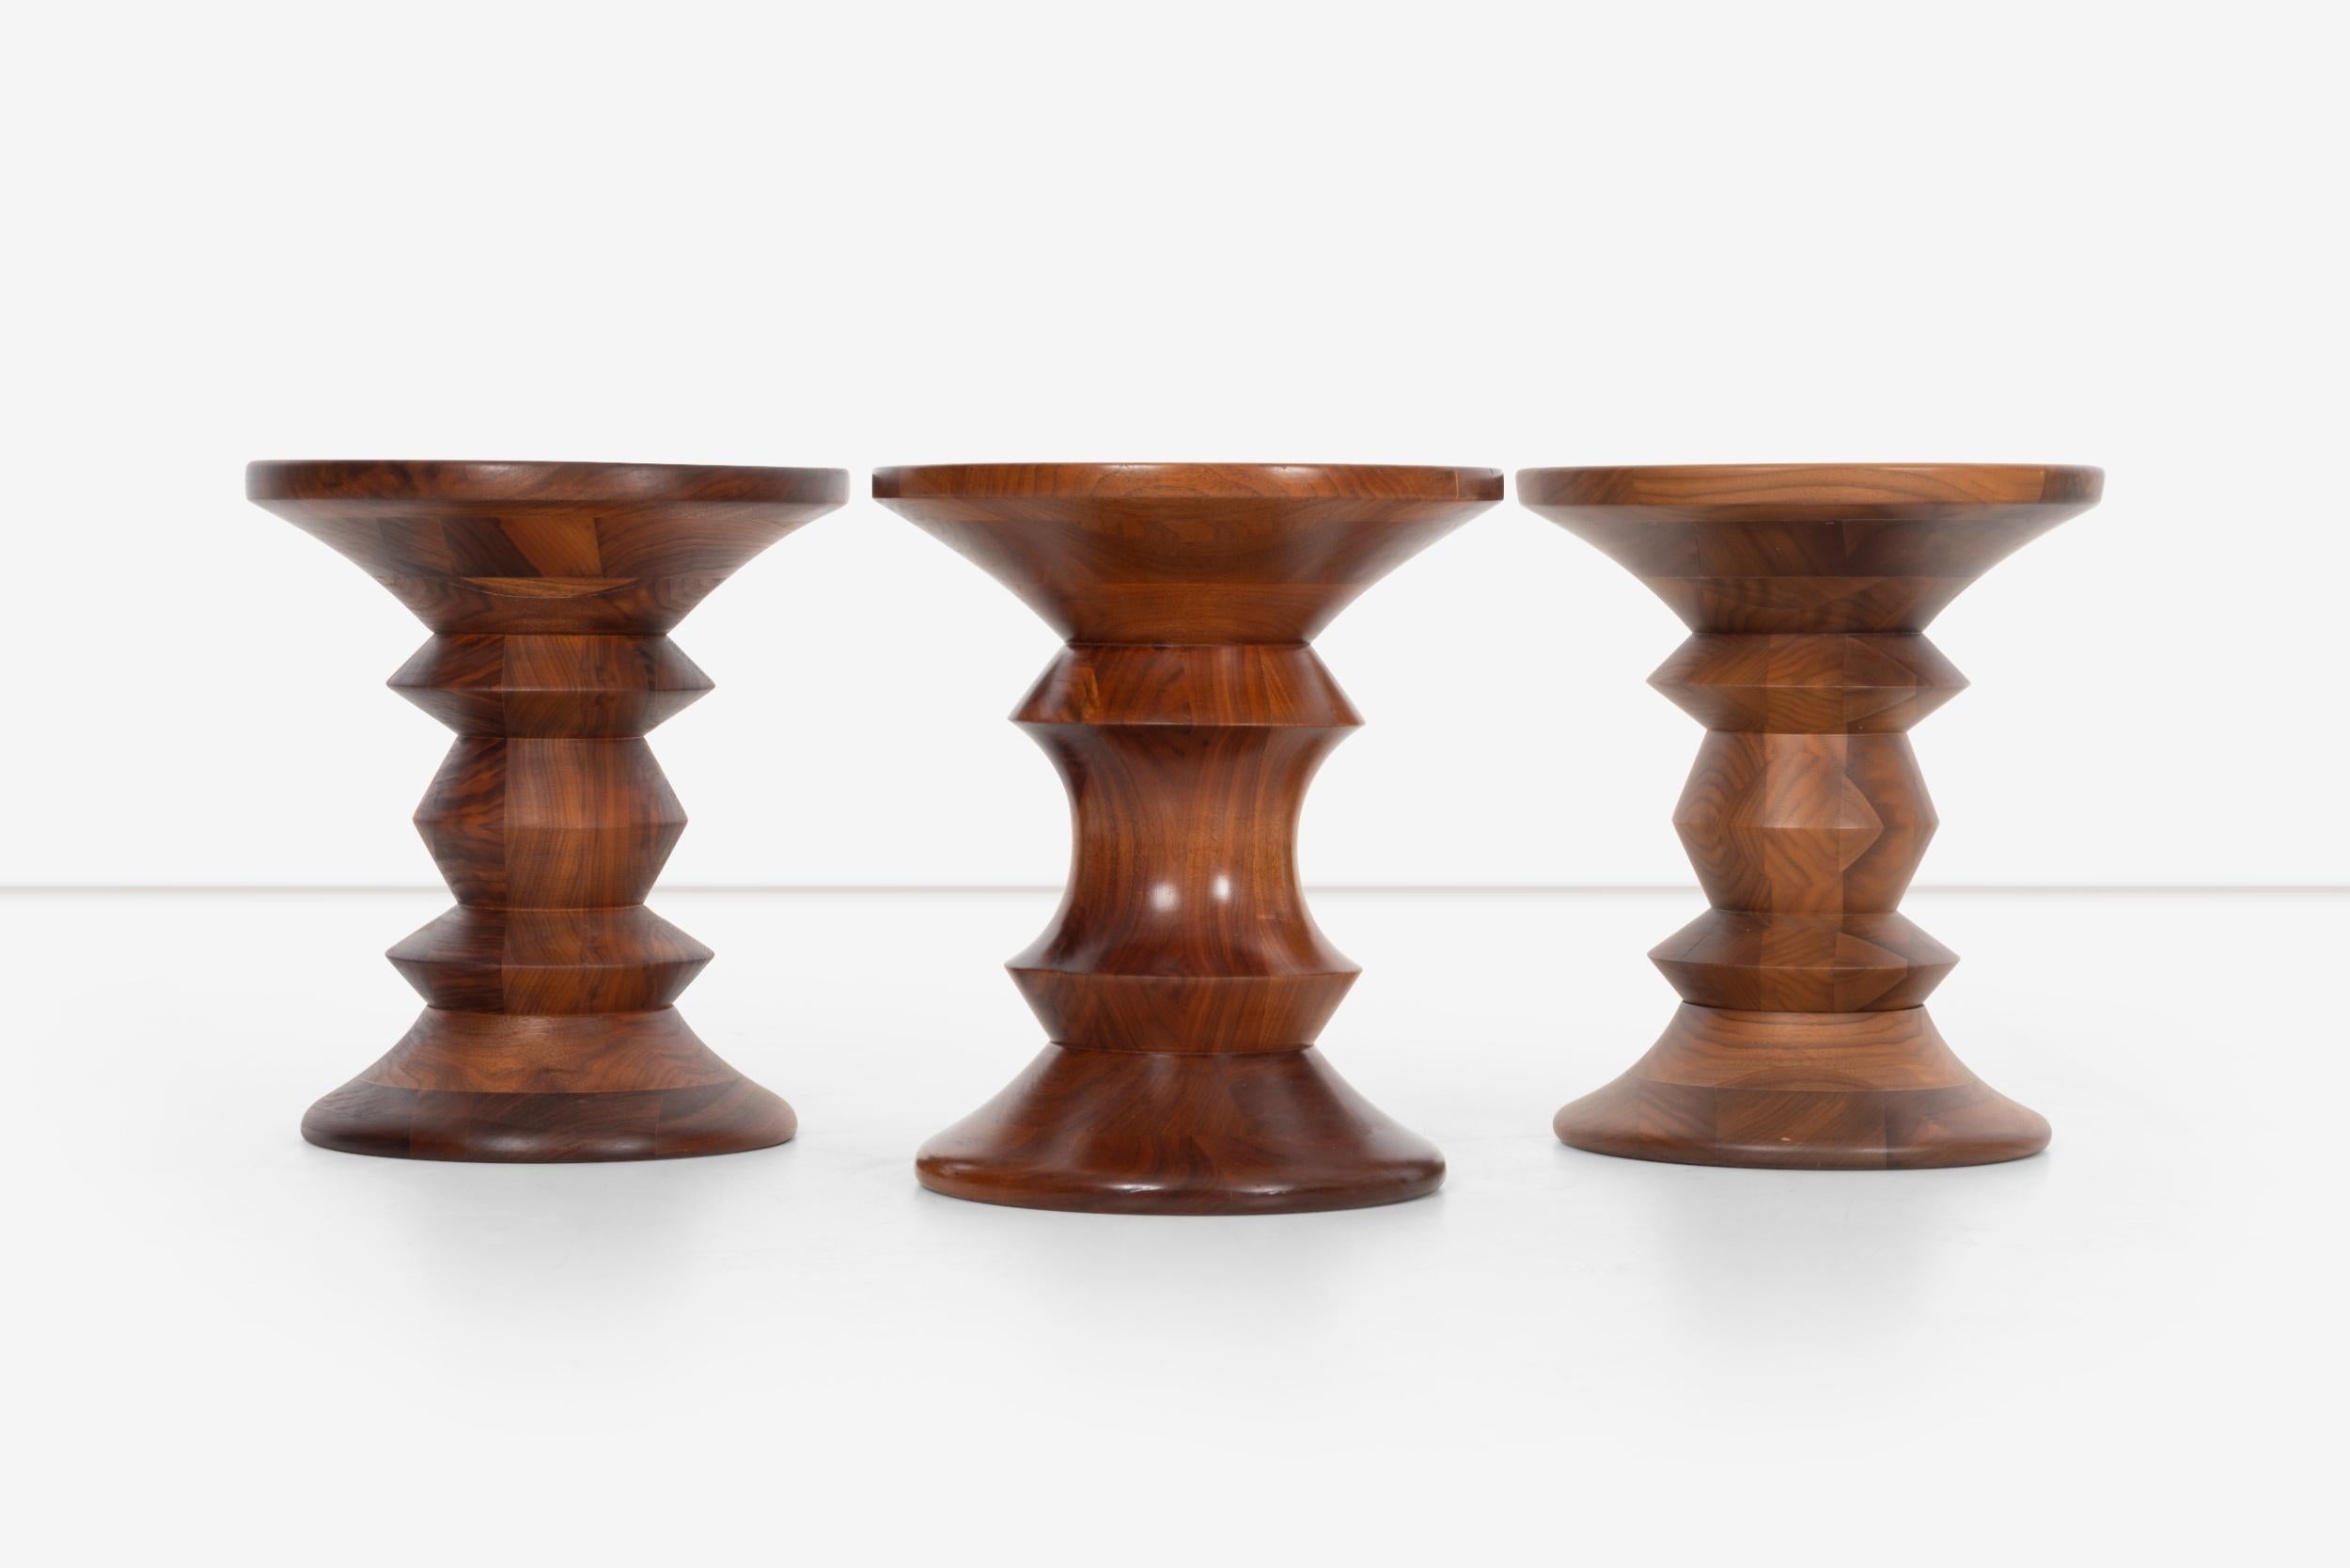 Charles Eames early time life stools set of three 1960
Two have the same profile oiled walnut.